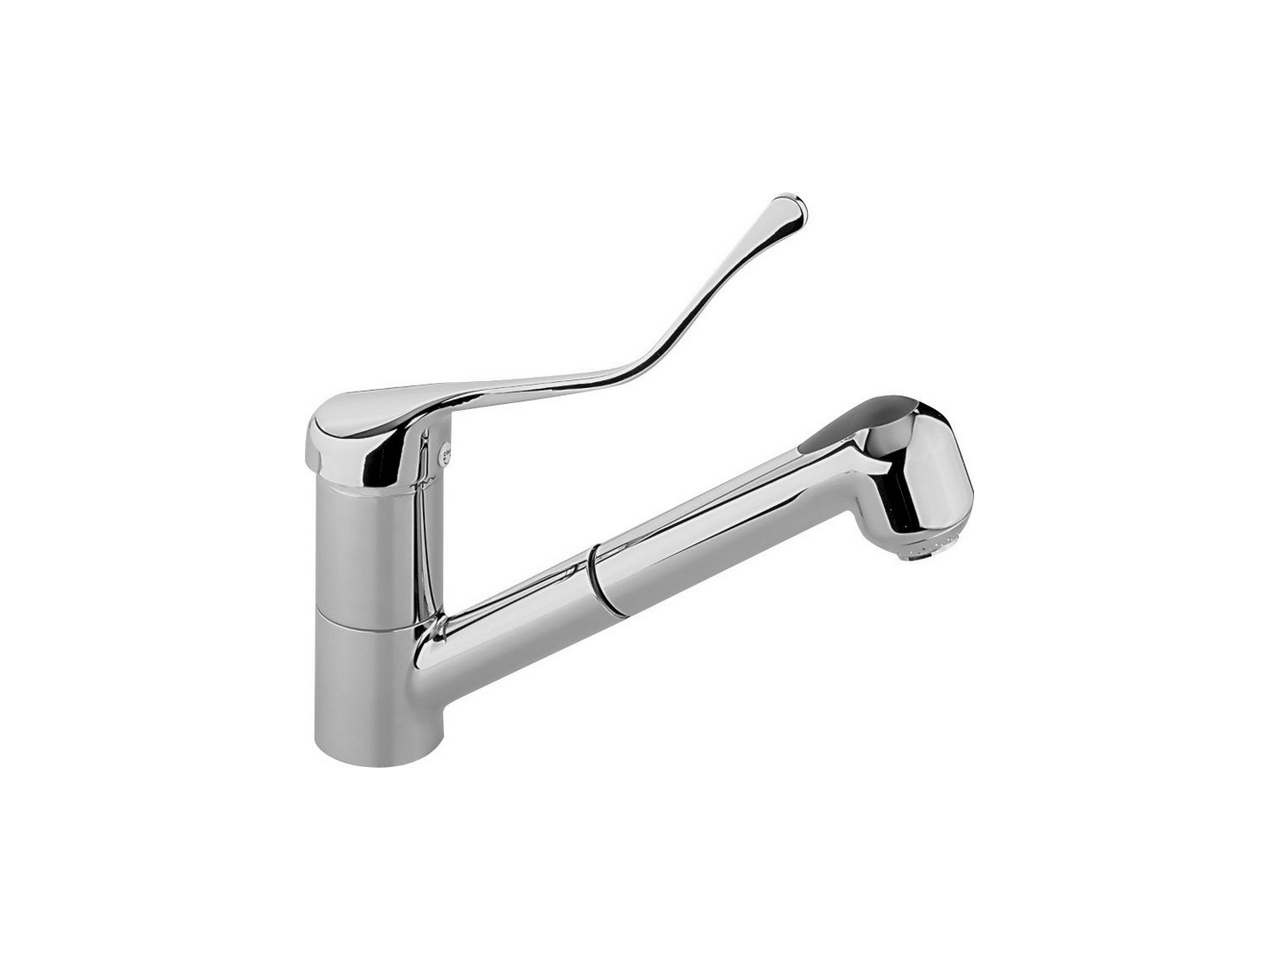 CisalSingle lever sink mixer with pull out handspray KITCHEN_EL002570